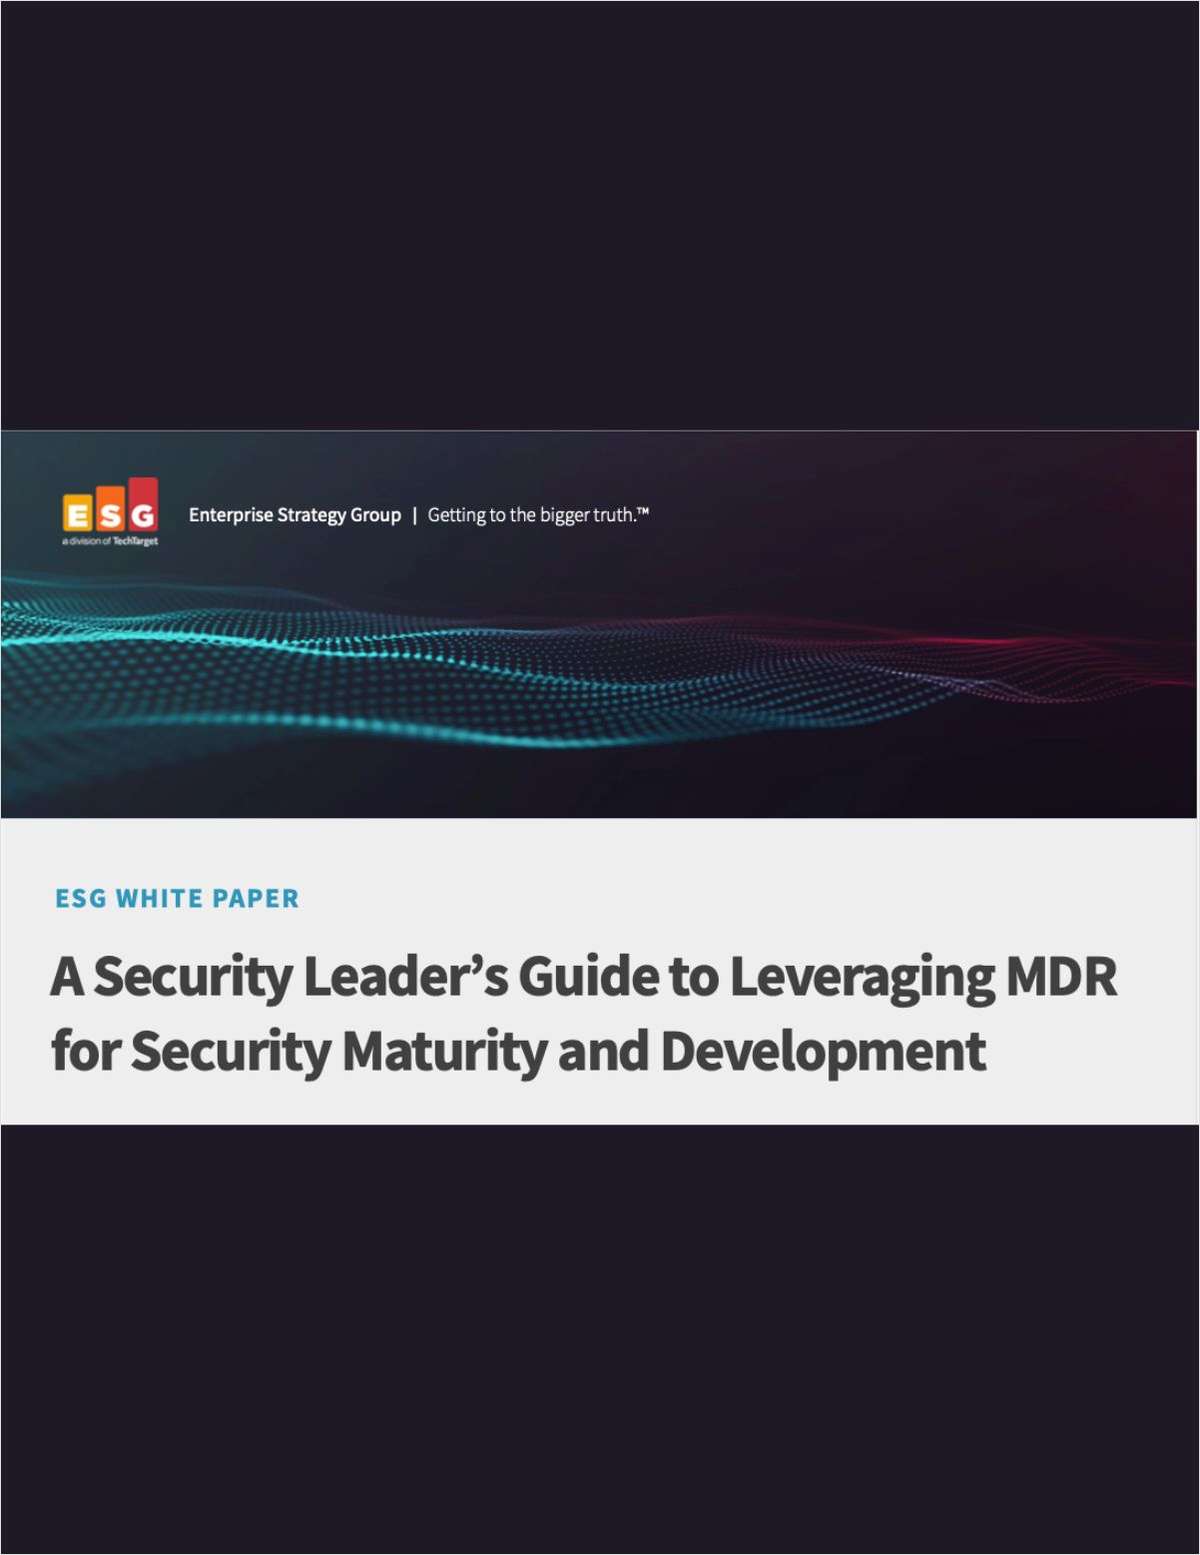 A Security Leader's Guide to Leveraging MDR for Security Maturity and Development